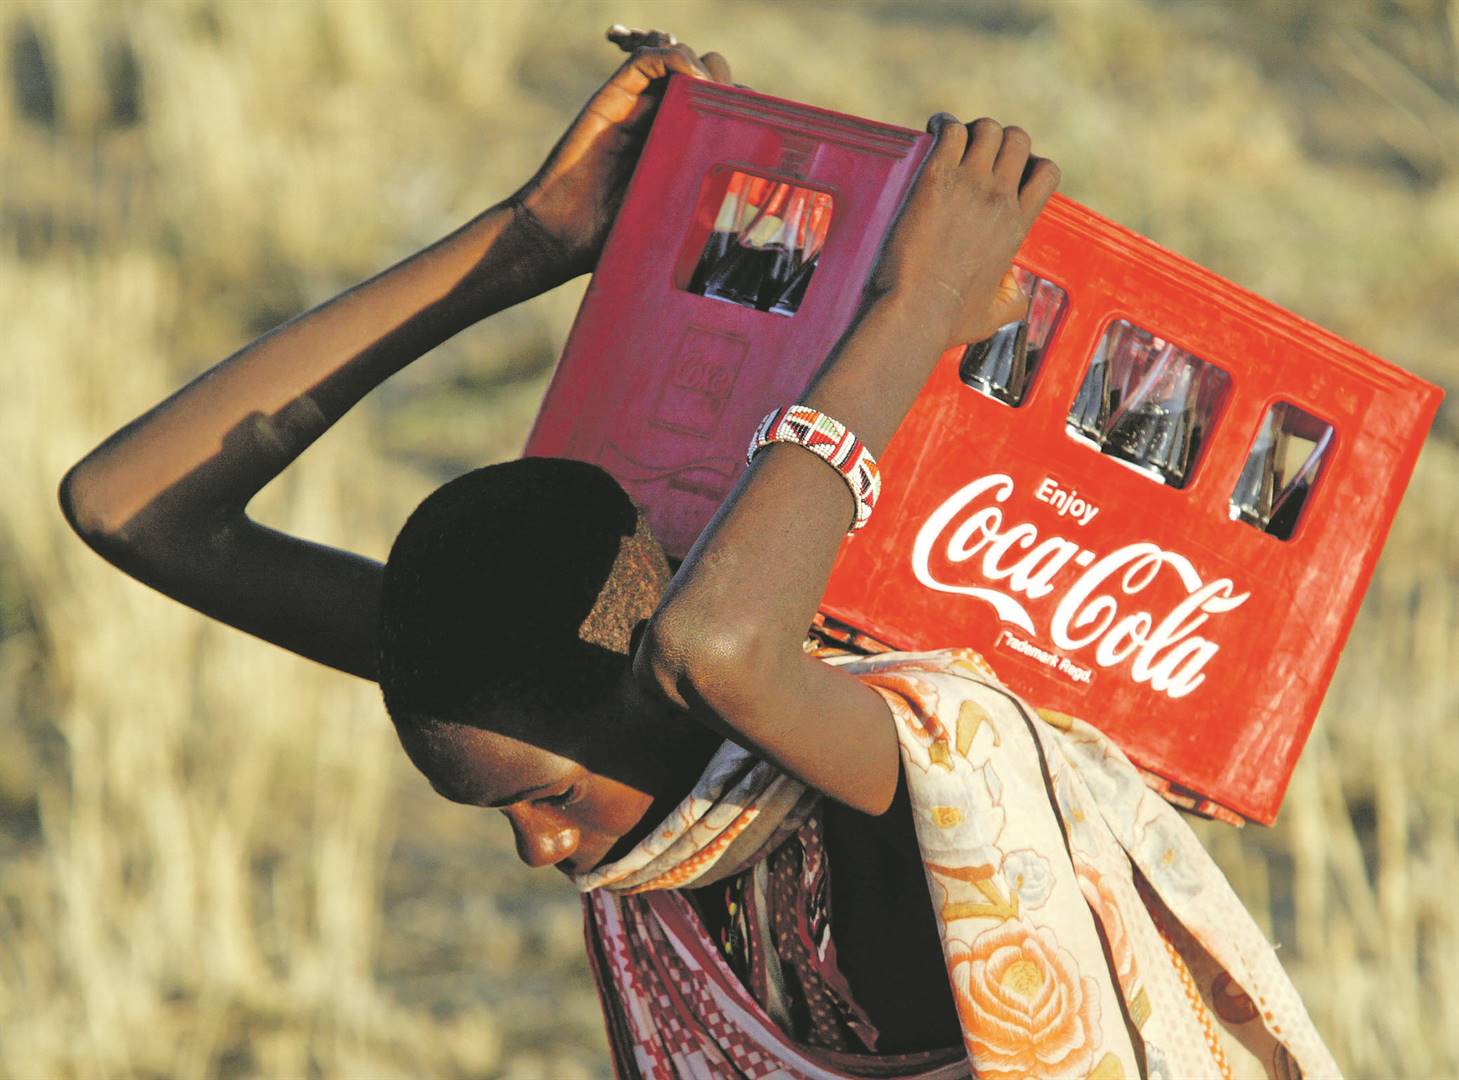 Histories of heritage arriving in Africa in the early 1900s, Coca-Cola’s story is deeply and, often surprisingly, entangled with key moments in African history.